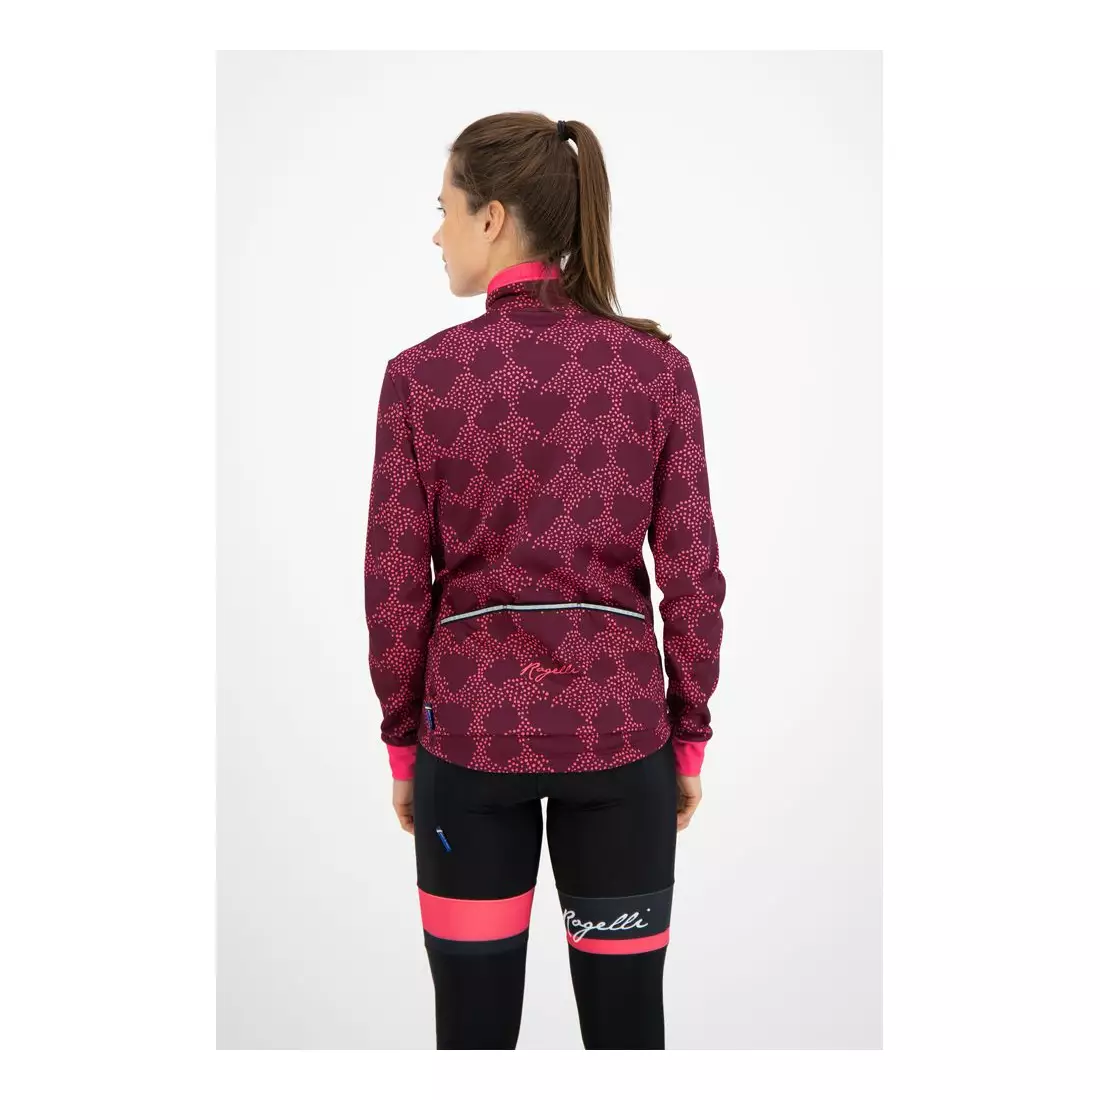 ROGELLI women's cycling jacket BLOSSOM Cerise/Coral 010.324